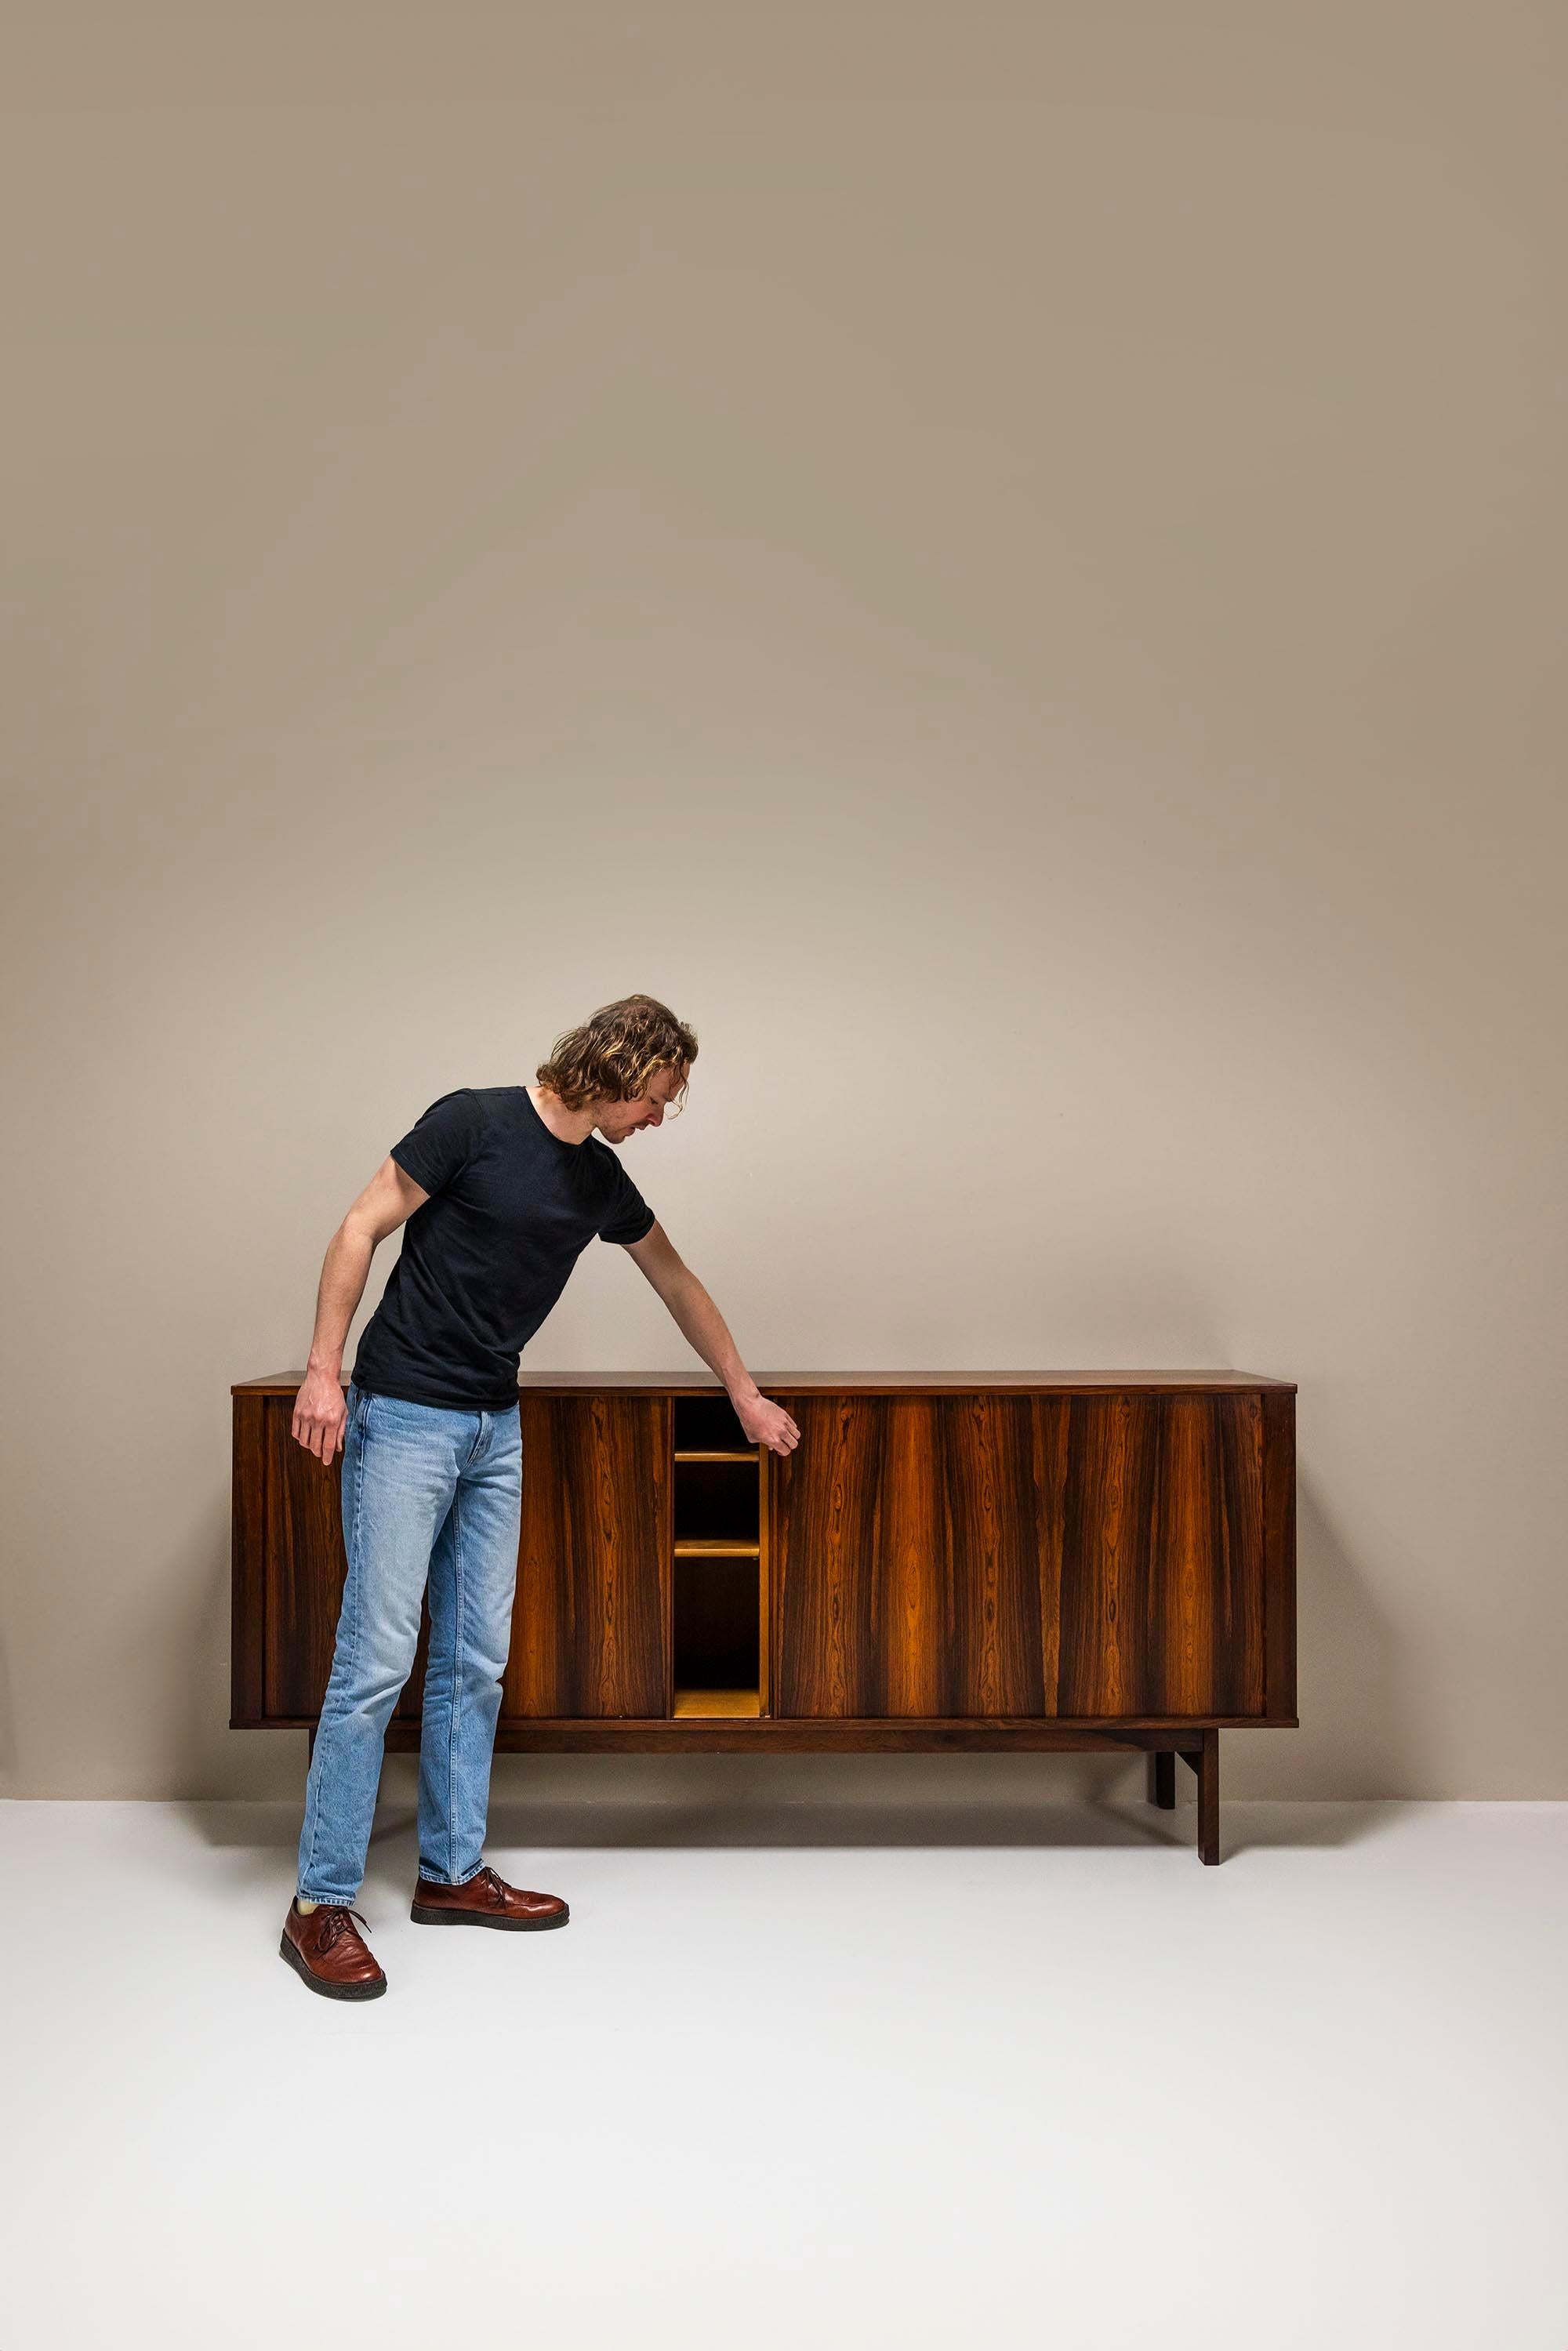 The Danish sideboards are generally spacious and robustly built. Craftsmanship and refined sense of proportion is a constant factor. In addition, they also stood the test of time with verve.

Design
This sideboard has an impressive appearance solely